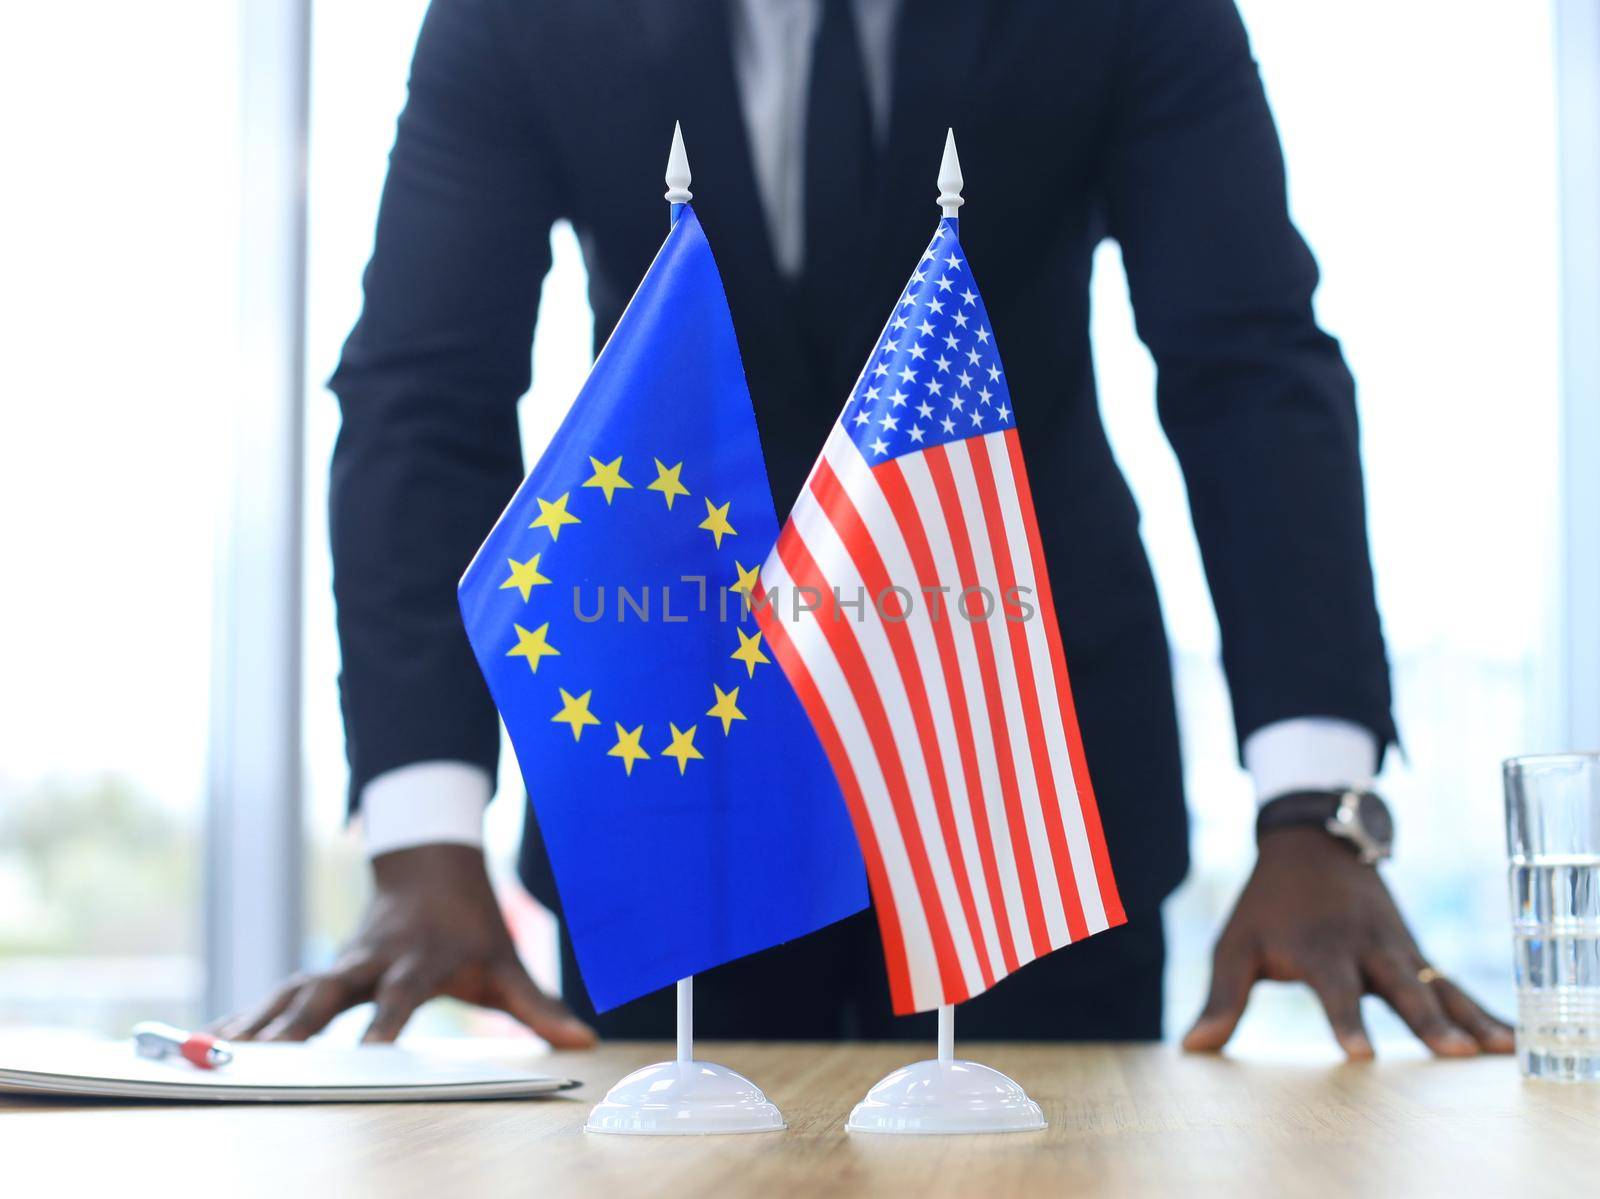 American flag and flag of European Union with businessman near by. by tsyhun